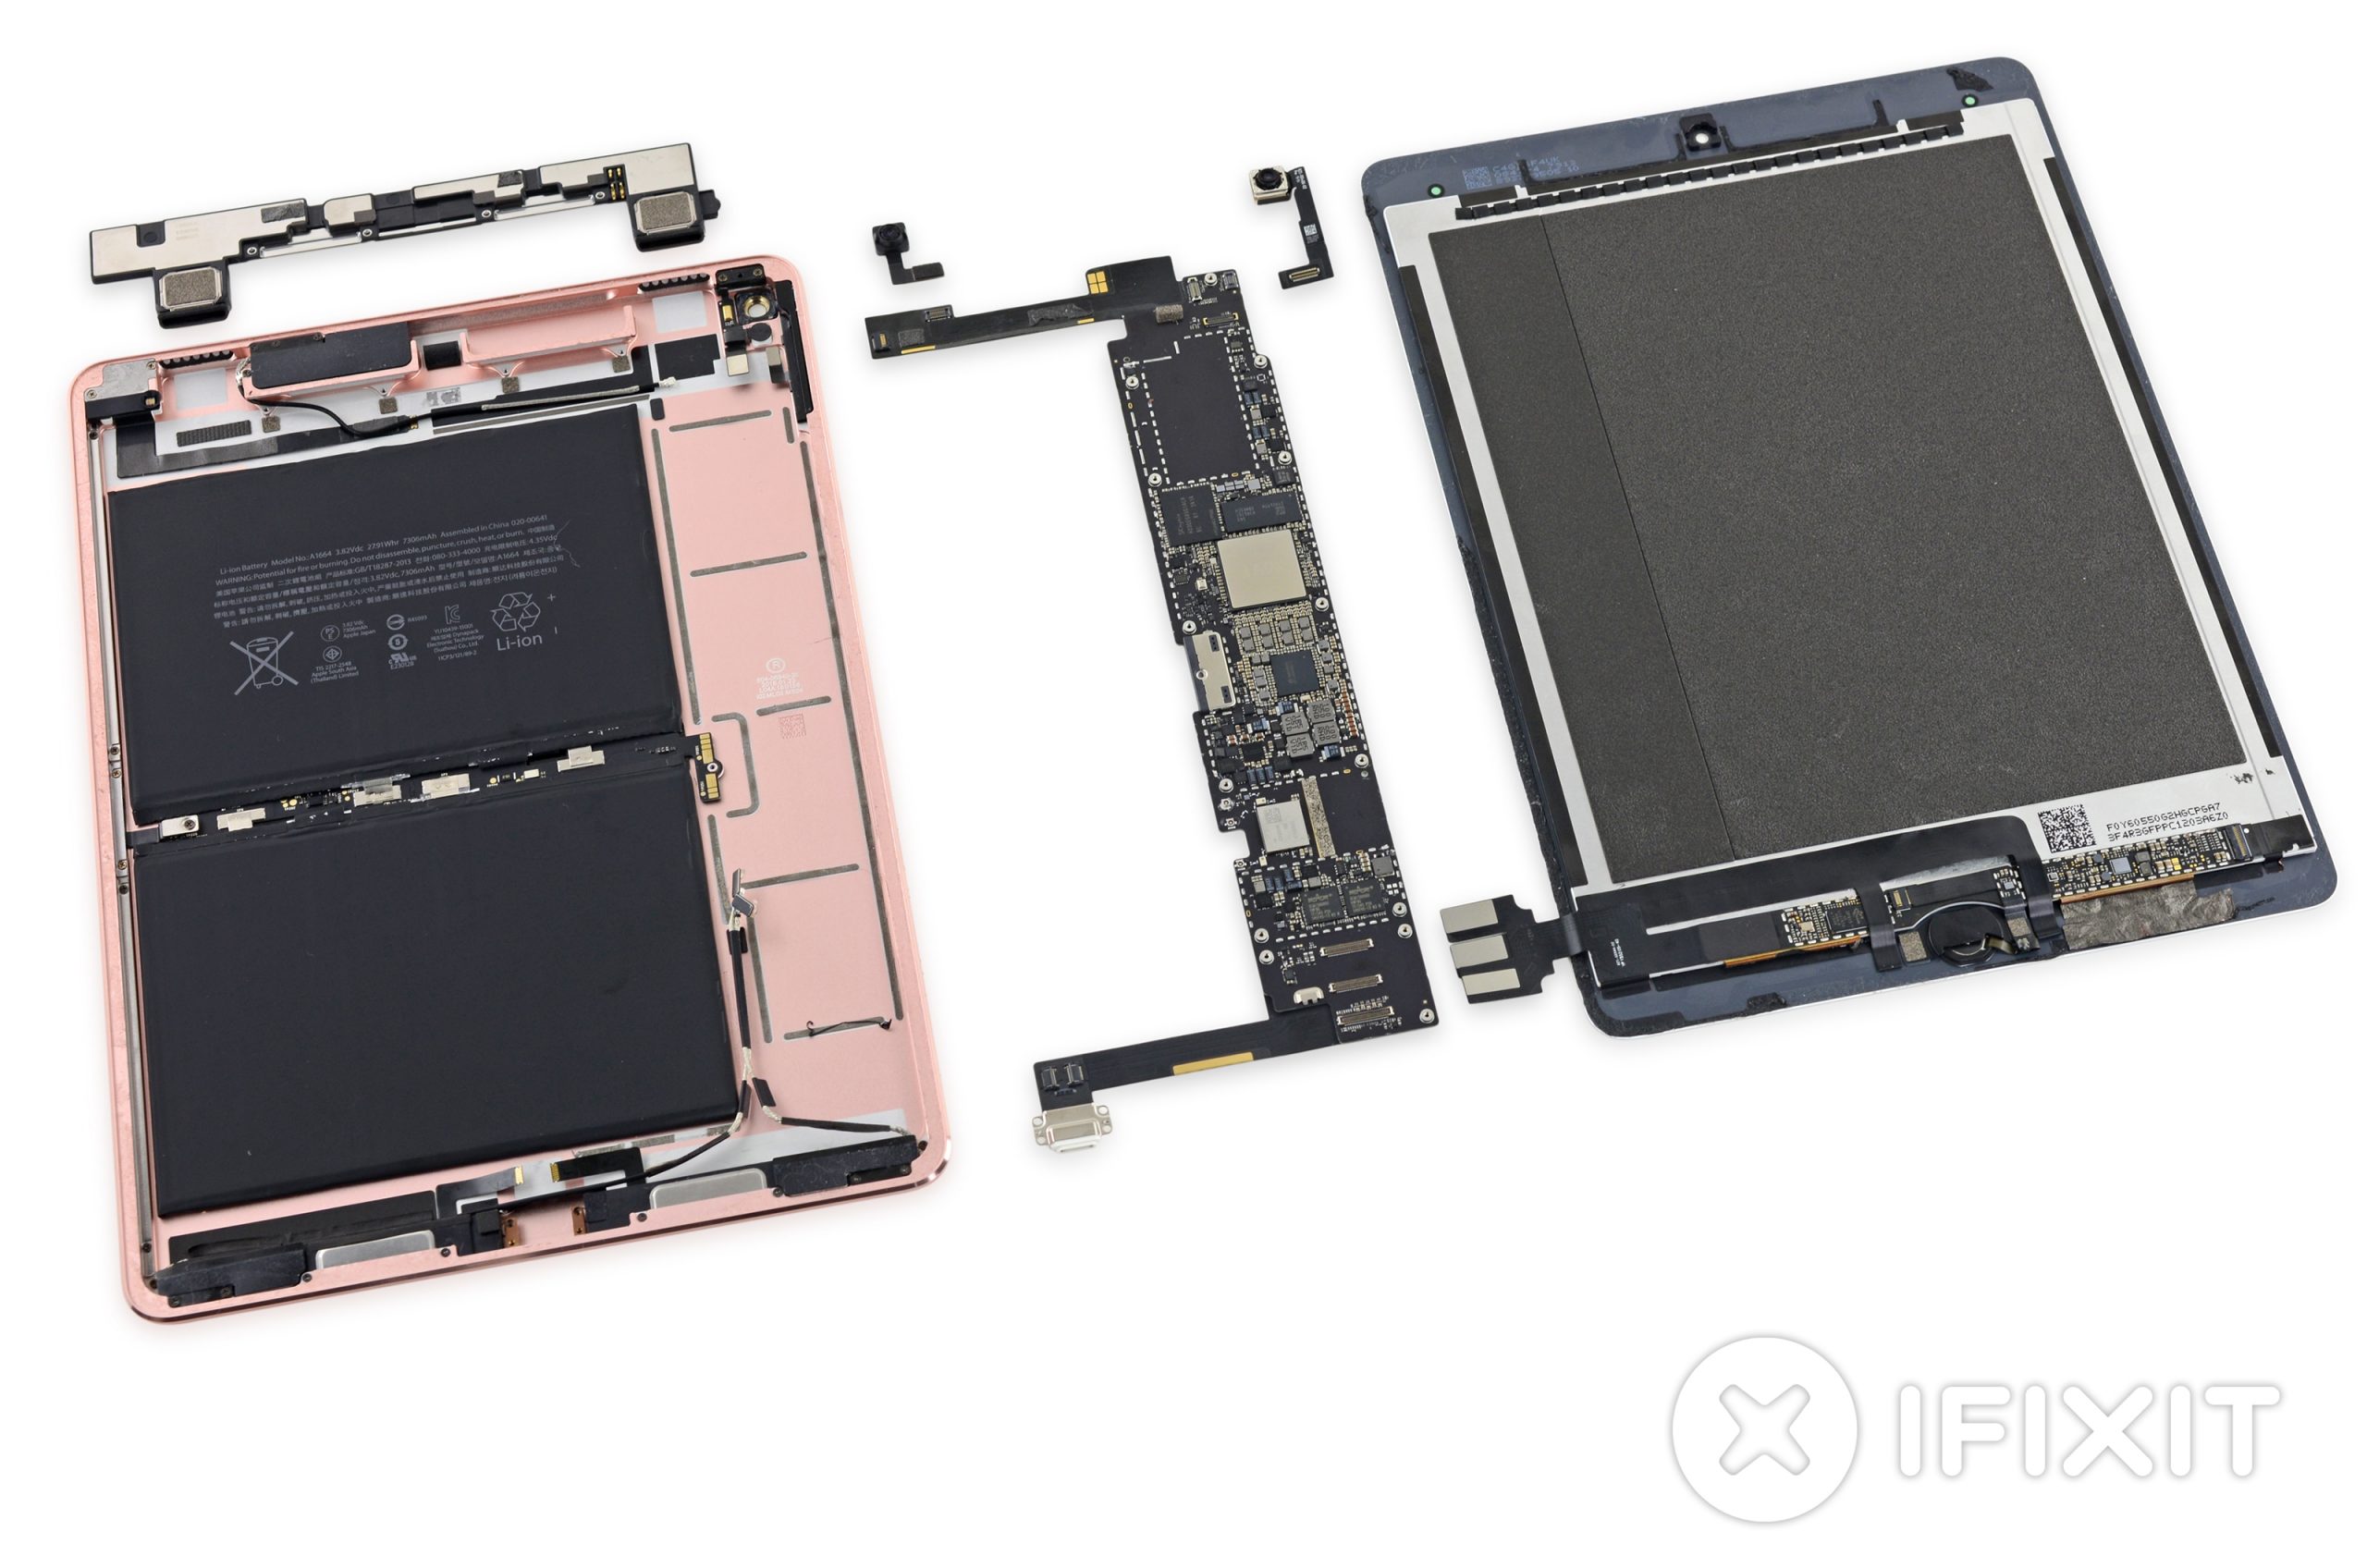 9.7-inch iPad Pro falls into the hands of iFixit